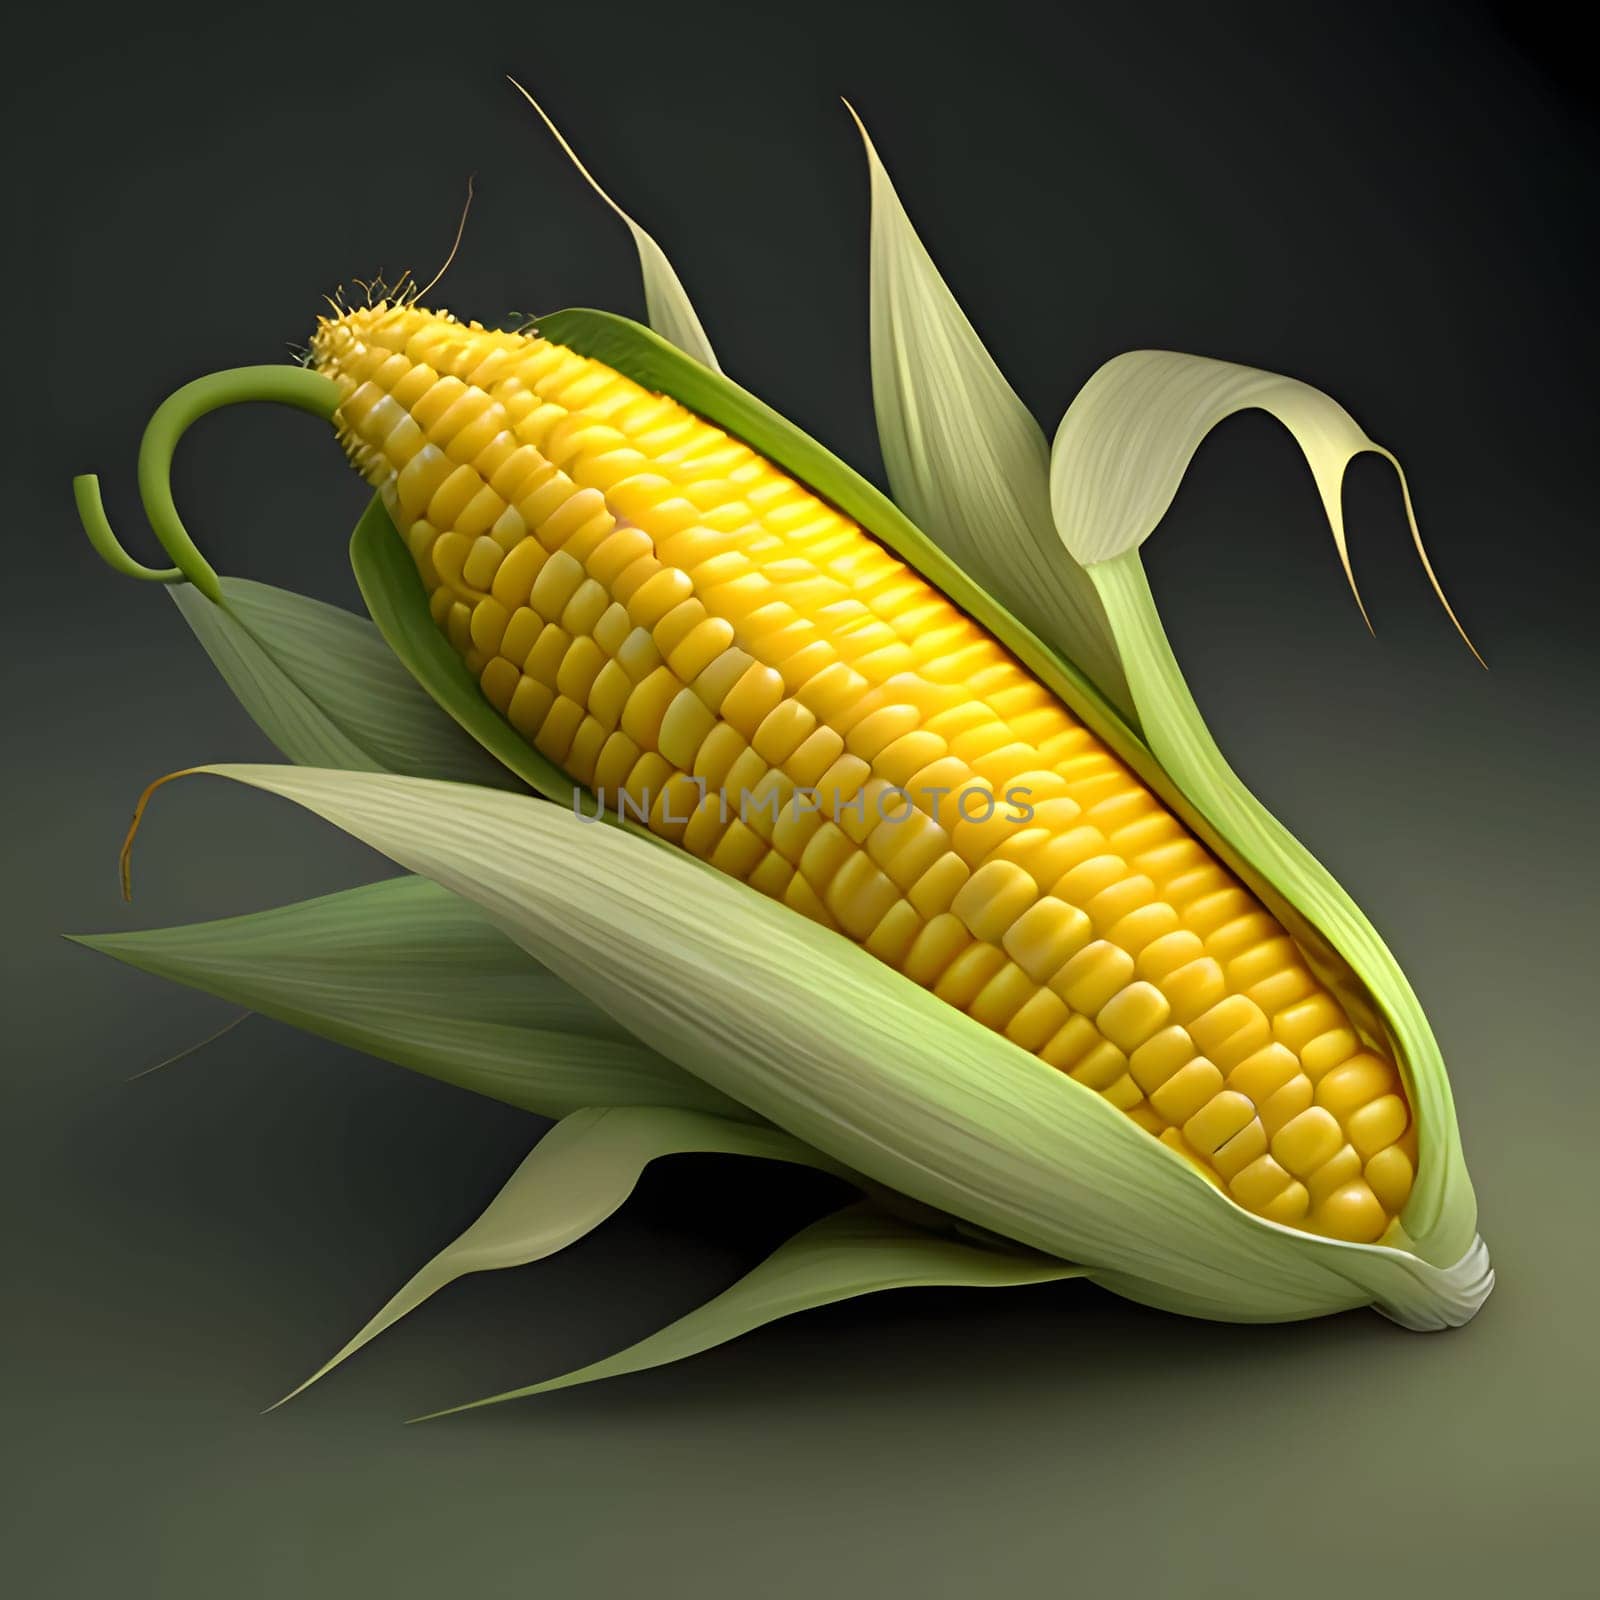 Yellow corn cob with green leaves on a solid dark background. Corn as a dish of thanksgiving for the harvest. An atmosphere of joy and celebration.